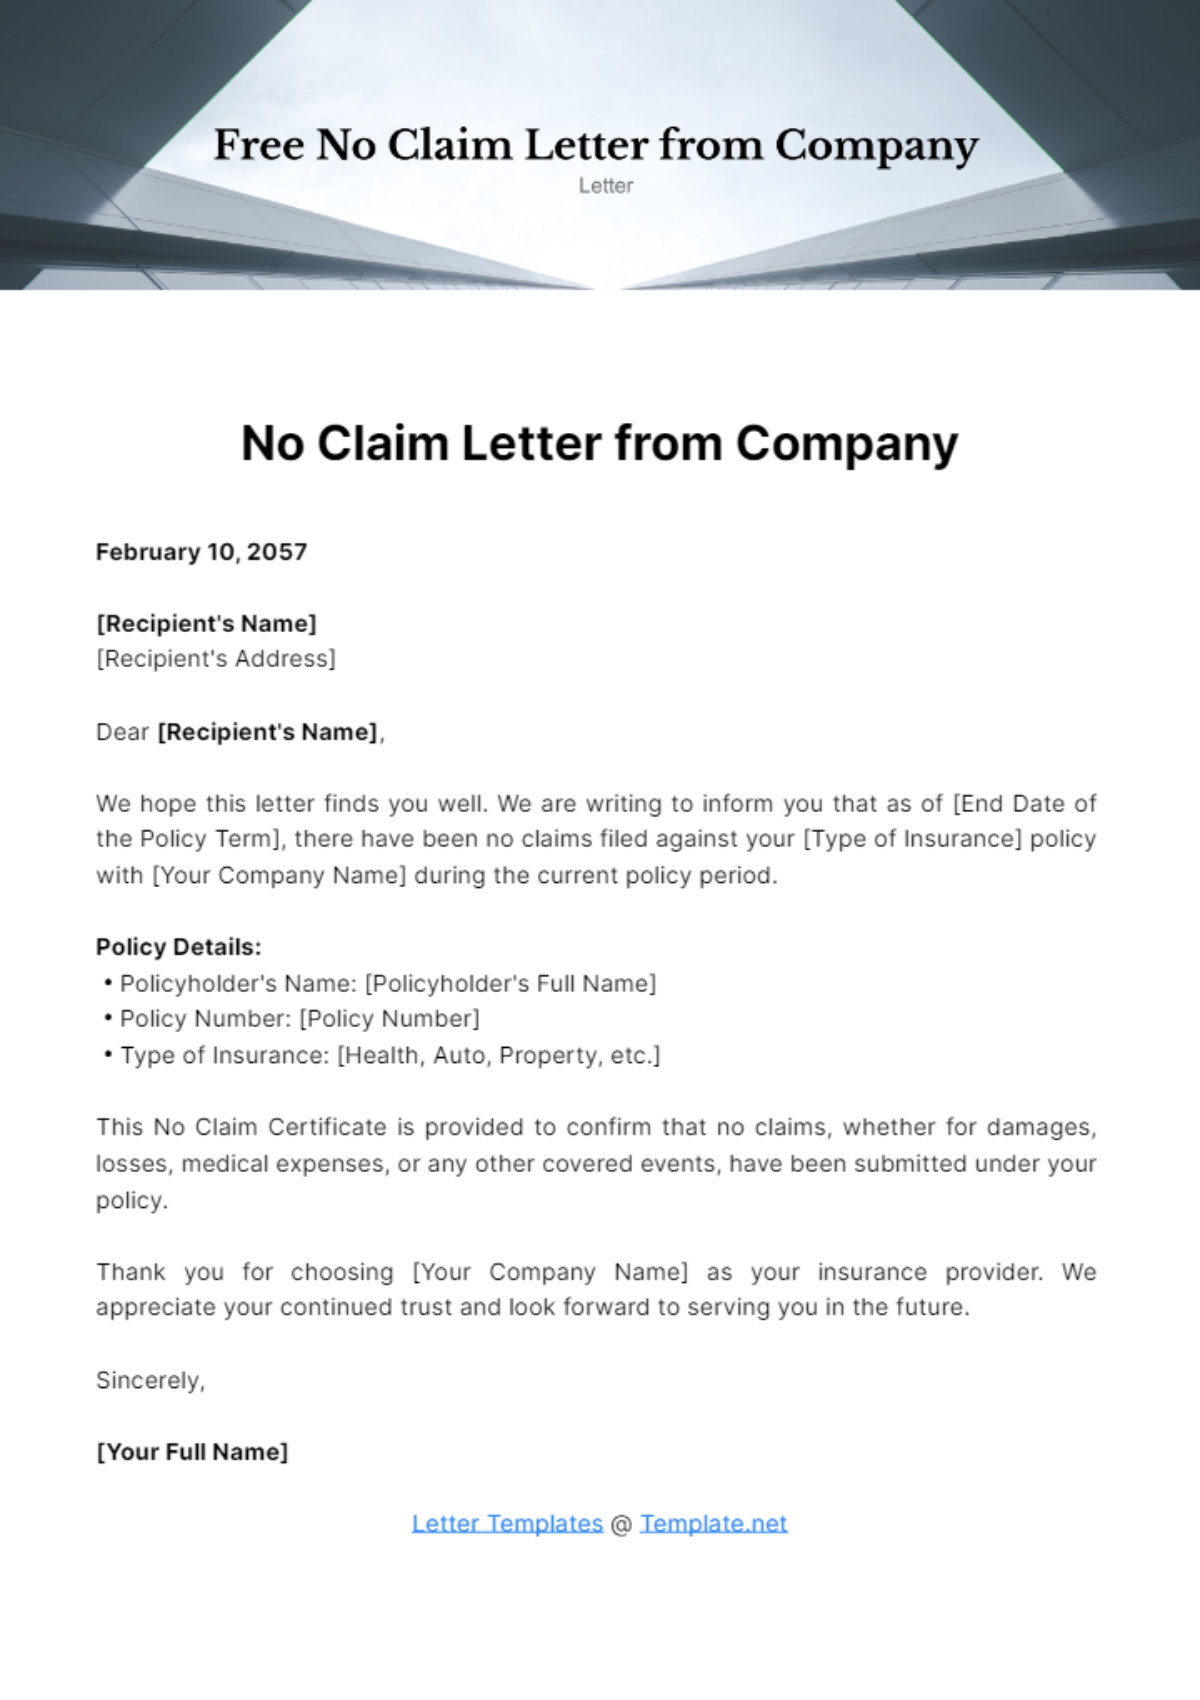 No Claim Letter from Company Template